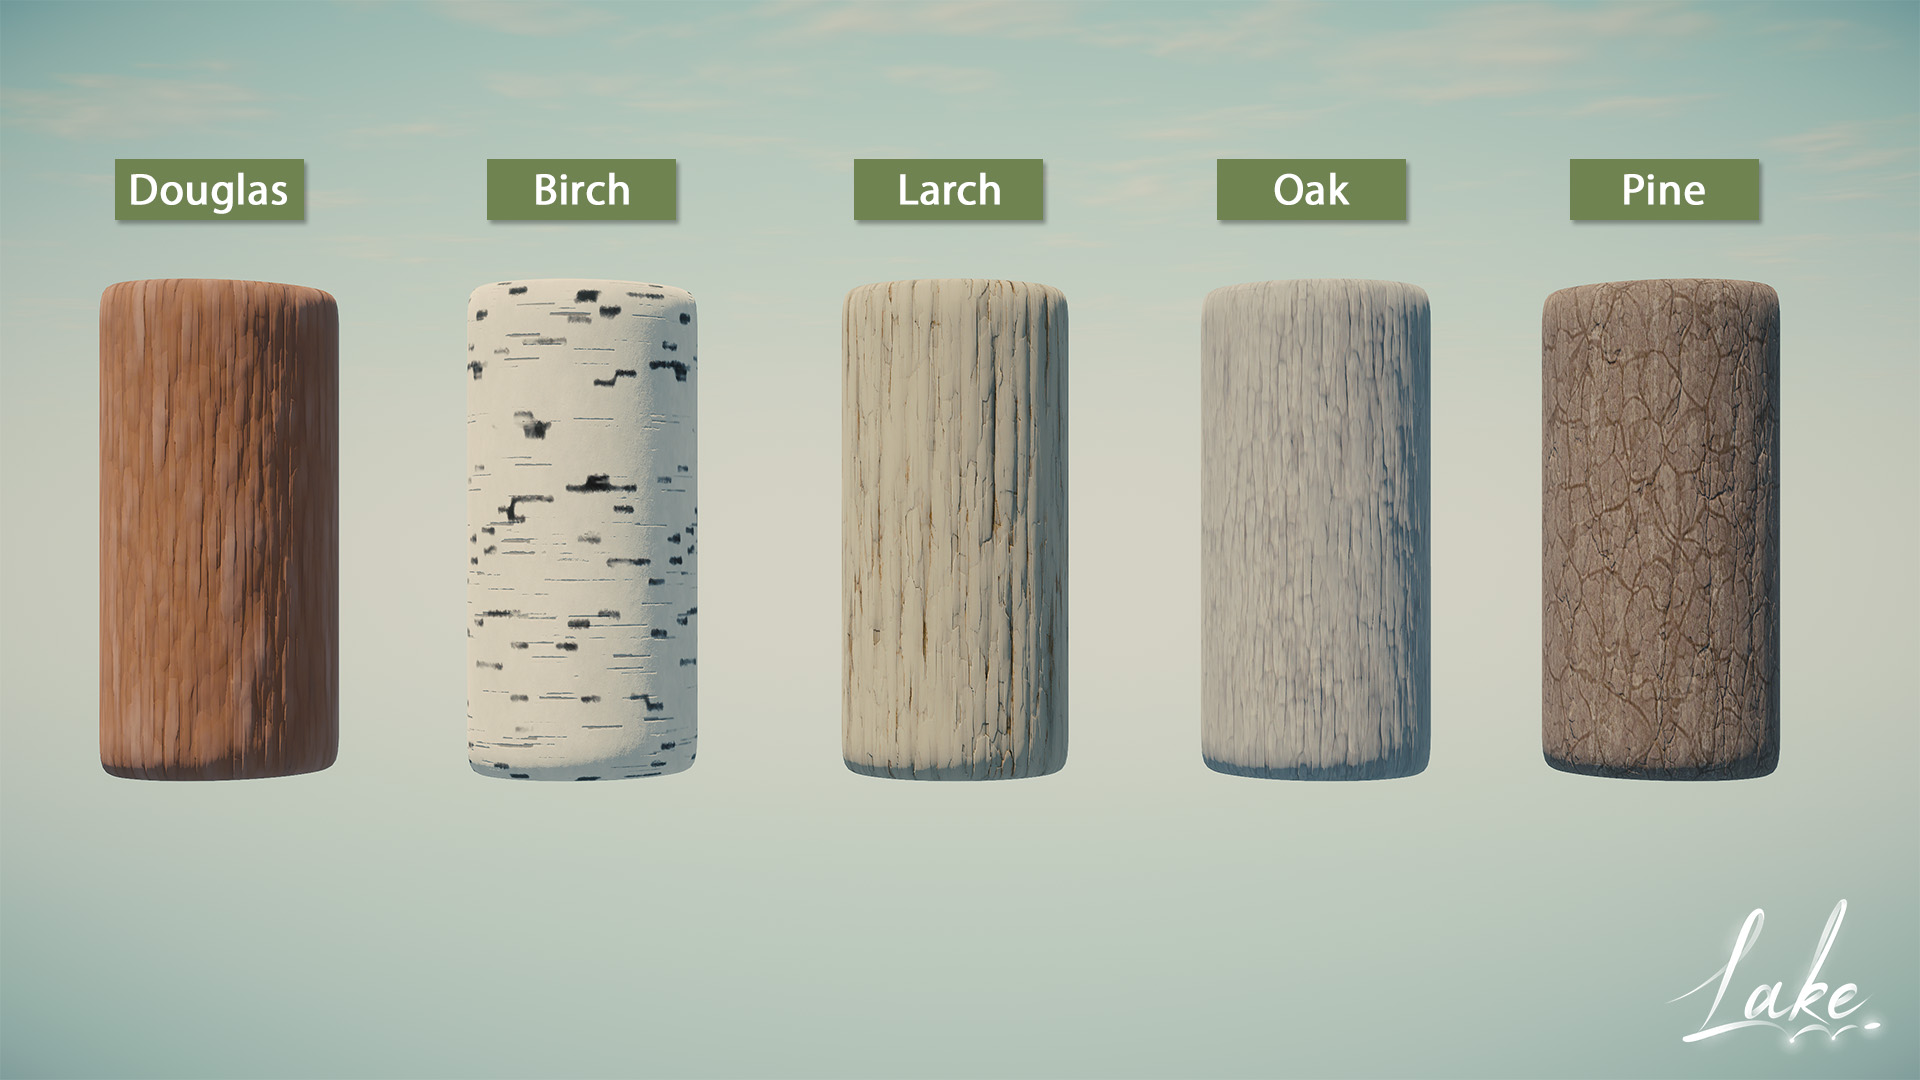 Different bark materials, Douglas, birch, larch, oak and pine are side by side